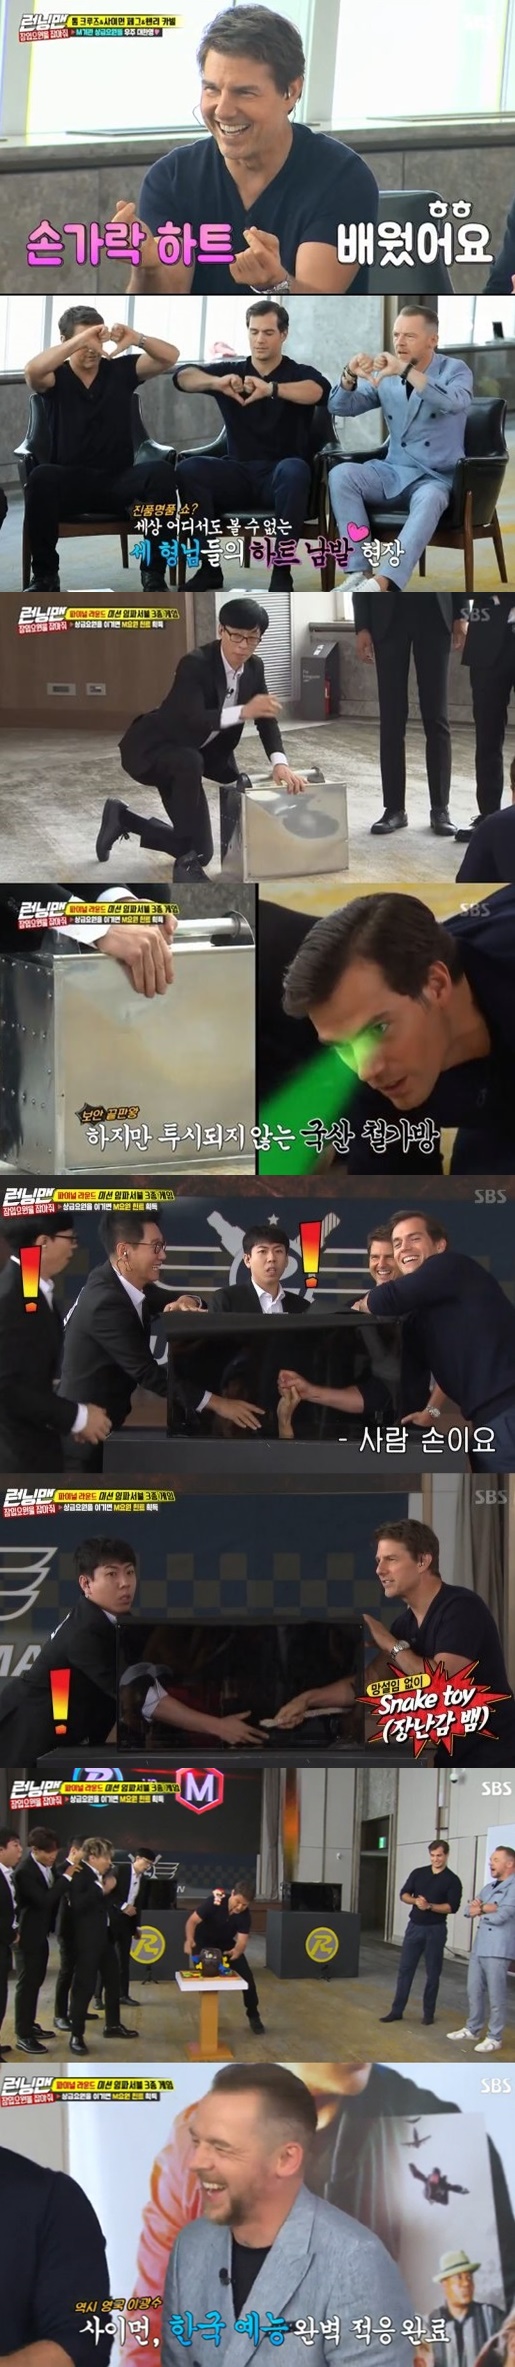 SBS Running Man topped the double-digit ratings and ranked first in the same time zone entertainment ratings.According to Nielsen Korea, a ratings agency on the 23rd, Running Man, which aired on the 22nd, recorded an average TV viewer ratings of 7.1% and a second part of 10% (based on households in the Seoul metropolitan area), beating MBC Masked Wang (9.7%) and KBS2 Happy Sunday (8.2%).In particular, Running Mans double-digit ratings are the second highest ratings this year, only four months after March.In addition, target ratings of 20-49 years old (hereinafter referred to as 2049), which are considered important indicators of major advertising officials, also soared to 5.7%.The figure is the record of the 2049 rating TOP 3 throughout the entertainment/culture program broadcast on the day.On the day of the show, Tom Cruise, Henry Carville and Simon Pegg, the actors of the movie Mission Impossible: Fall Out, which became a hot topic only with trailers, appeared in a surprise appearance.Hold me on to Project 2: Hold the infiltrators.Tom Cruise, who was the ninth to visit Korea, said, I am so glad to be able to come out of Running Man. Henry Carville, who visited Korea for the first time, said, I am so excited and excited.Thank you for inviting me, he said.Simon Pegg also enthused the Running Man members with his unexpected finger heart attack saying, It is my second visit to Korea.Tom Cruise and Henry Carville also joined the Heart Attack and created various hearts and laughed.The final match between the members of Running Man and Mission Impossible was held. Although it was a limited recording time, the members of Mission surprised everyone with their Game fighting.In the Iron Bag Quiz, he did not mind lying on the floor, he wrote Trick Operation, and he overpowered the Running Man members with his best efforts in every Game.Tom Cruise played the Game of Uncle Tong, up to 11.6%, and took the best one minute.Tom Cruise said, It was a really fun time.The members of Running Man are great, he said, and the members thanked the three actors for presenting the signature name tag of Running Man as a gift.Running Man Capture